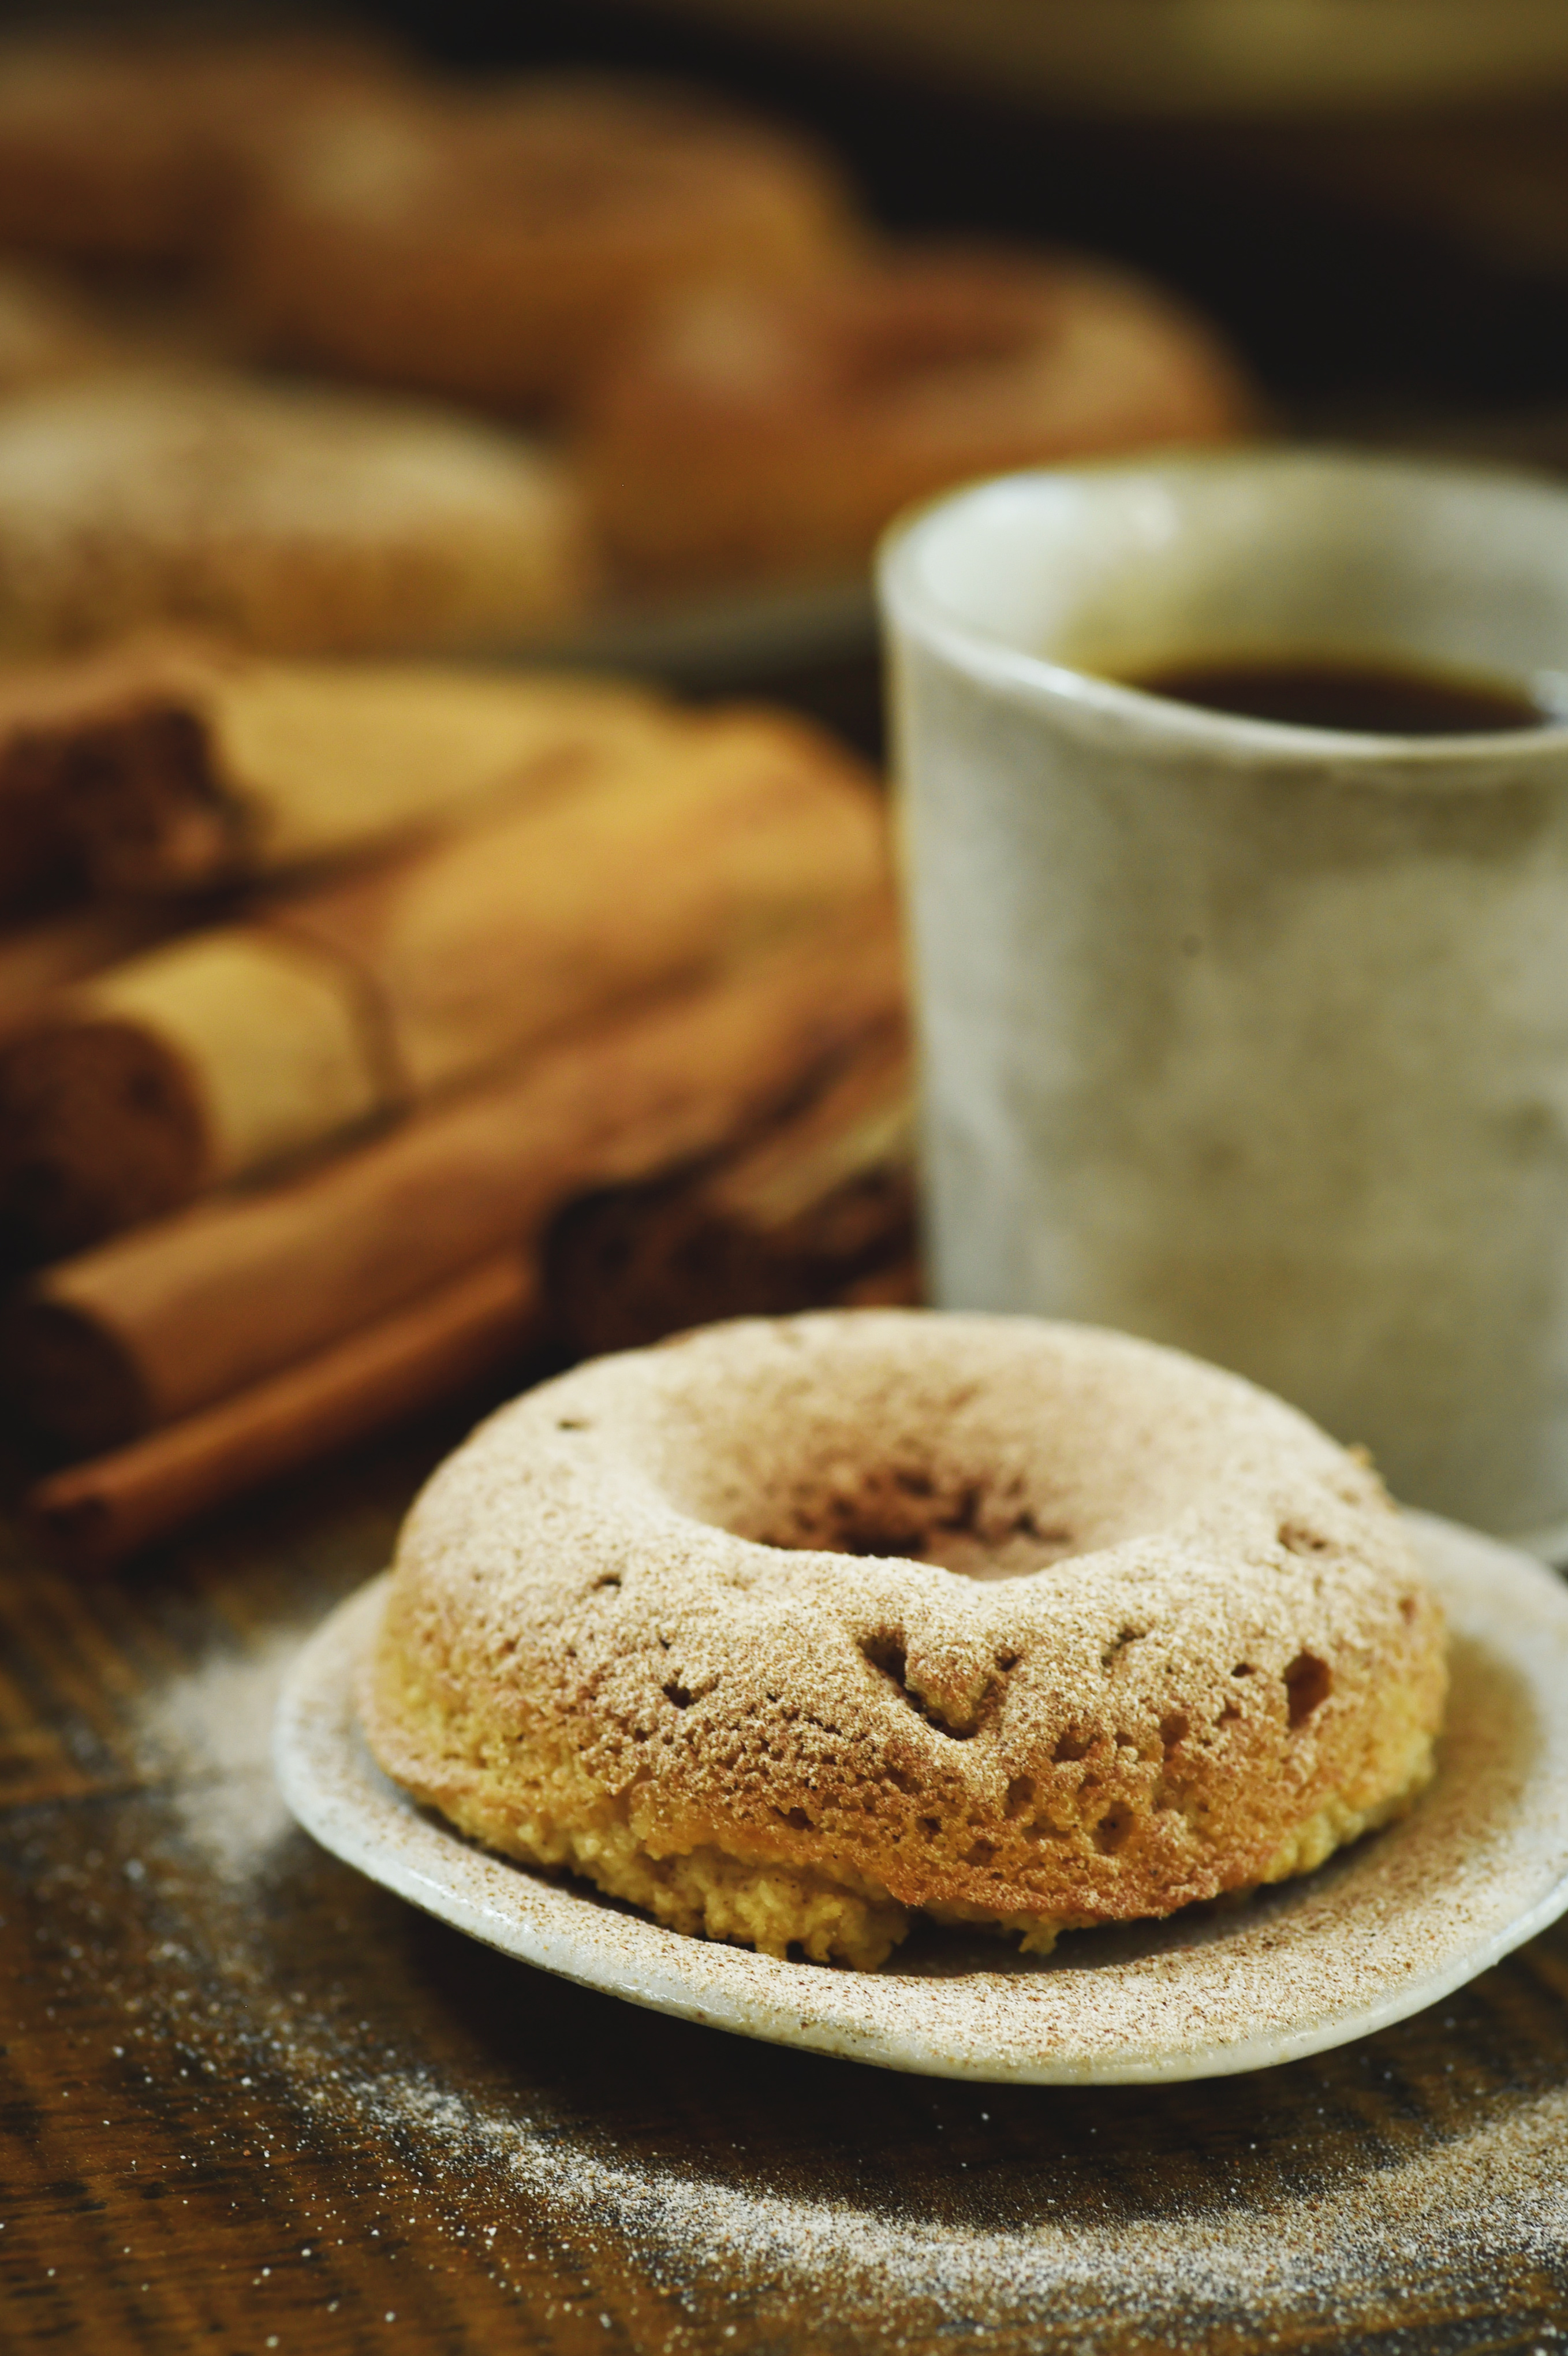 Low-Carb Cinnamon Sour Cream Donuts-shown with coffee and cinnamon sticks.